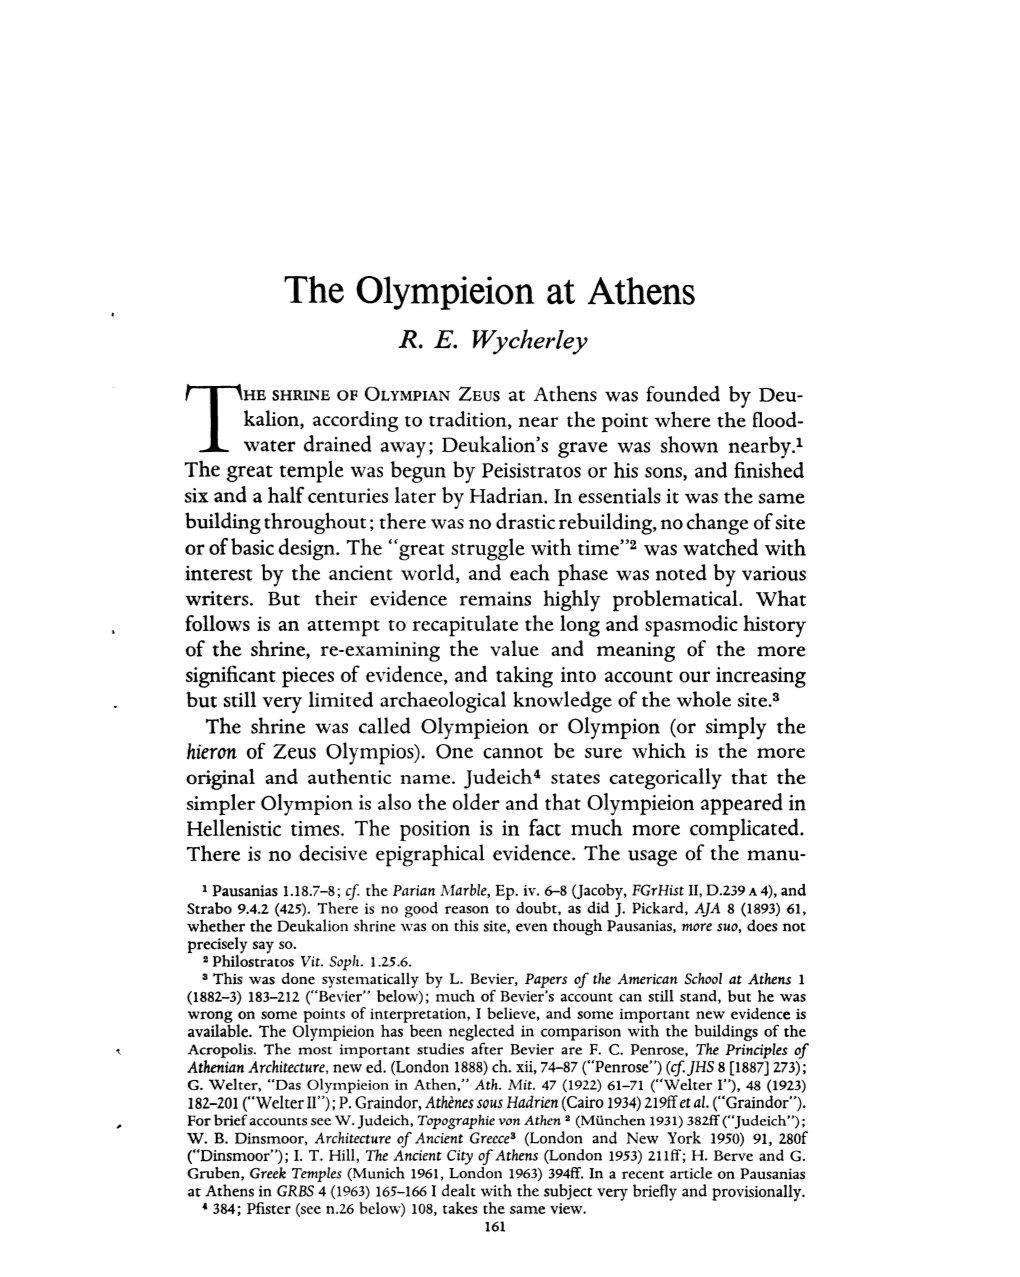 The Olympieion at Athens Wycherley, R E Greek, Roman and Byzantine Studies; Fall 1964; 5, 3; Proquest Pg